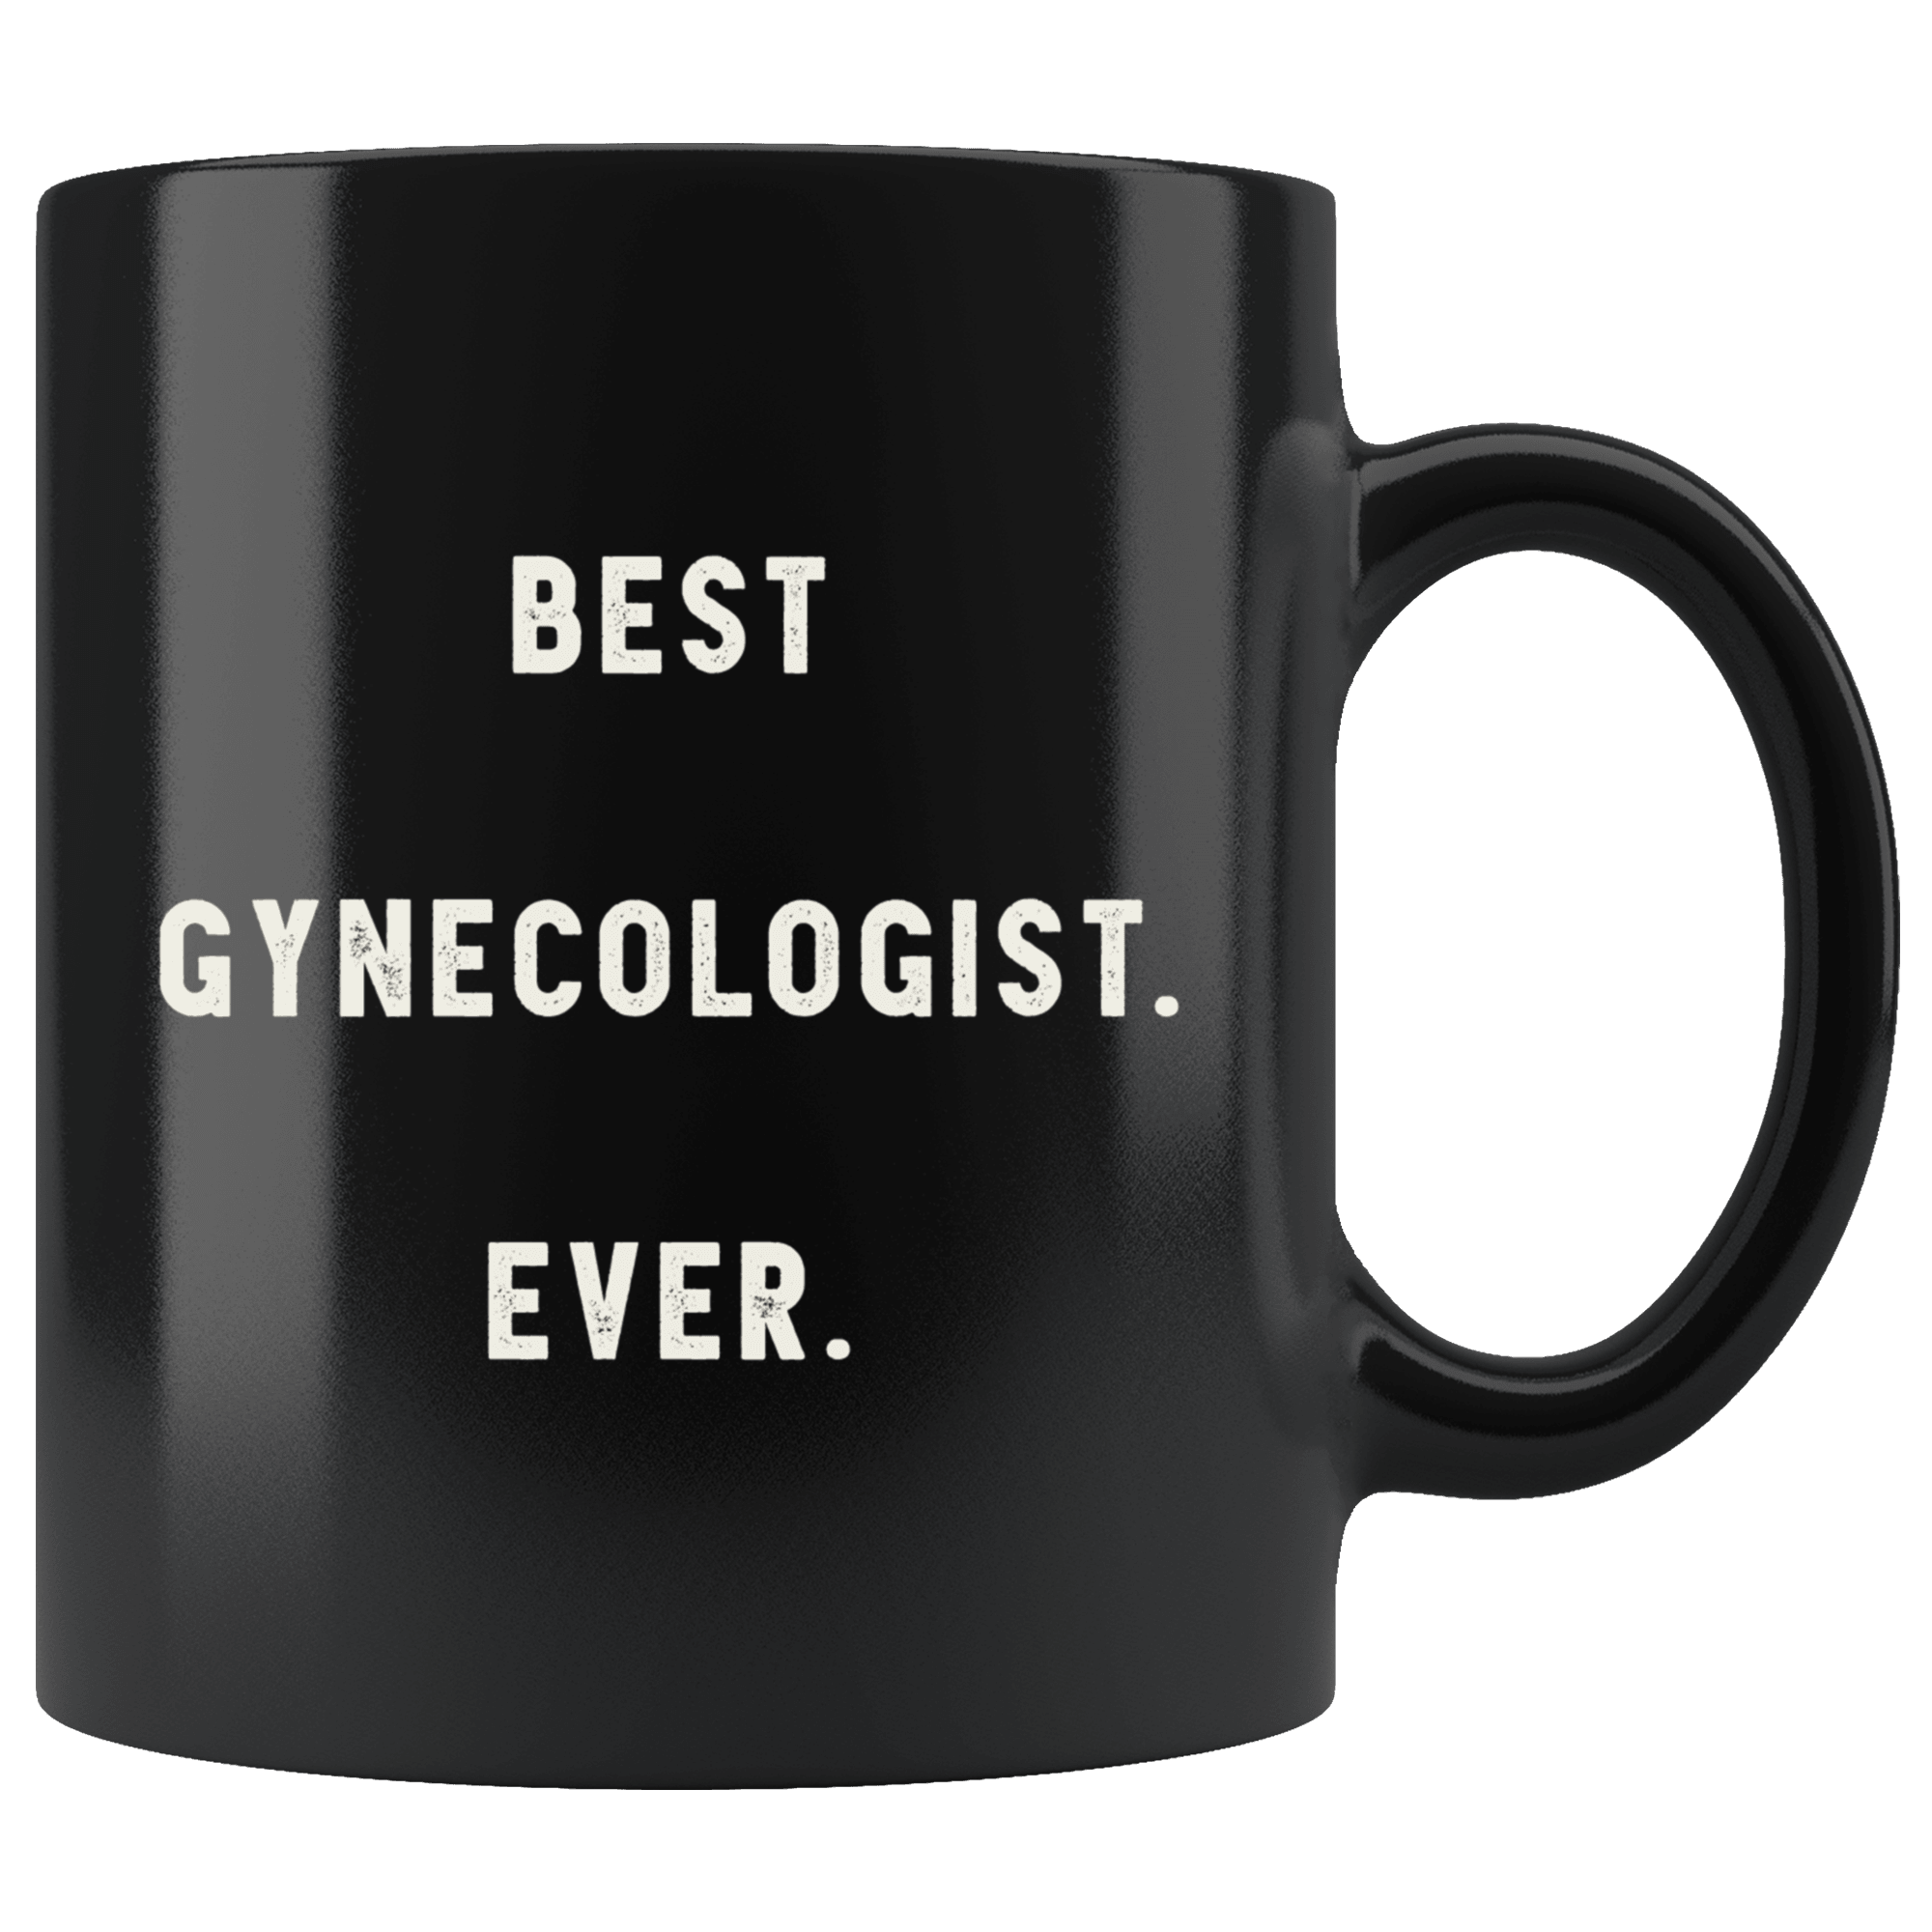 Buy Gift for Gynecologist, Personalized Gynecologist Gift Ideas, Gynecologist  Gift, Gynecologist Wine Glass, Best Gynecologist Online in India - Etsy